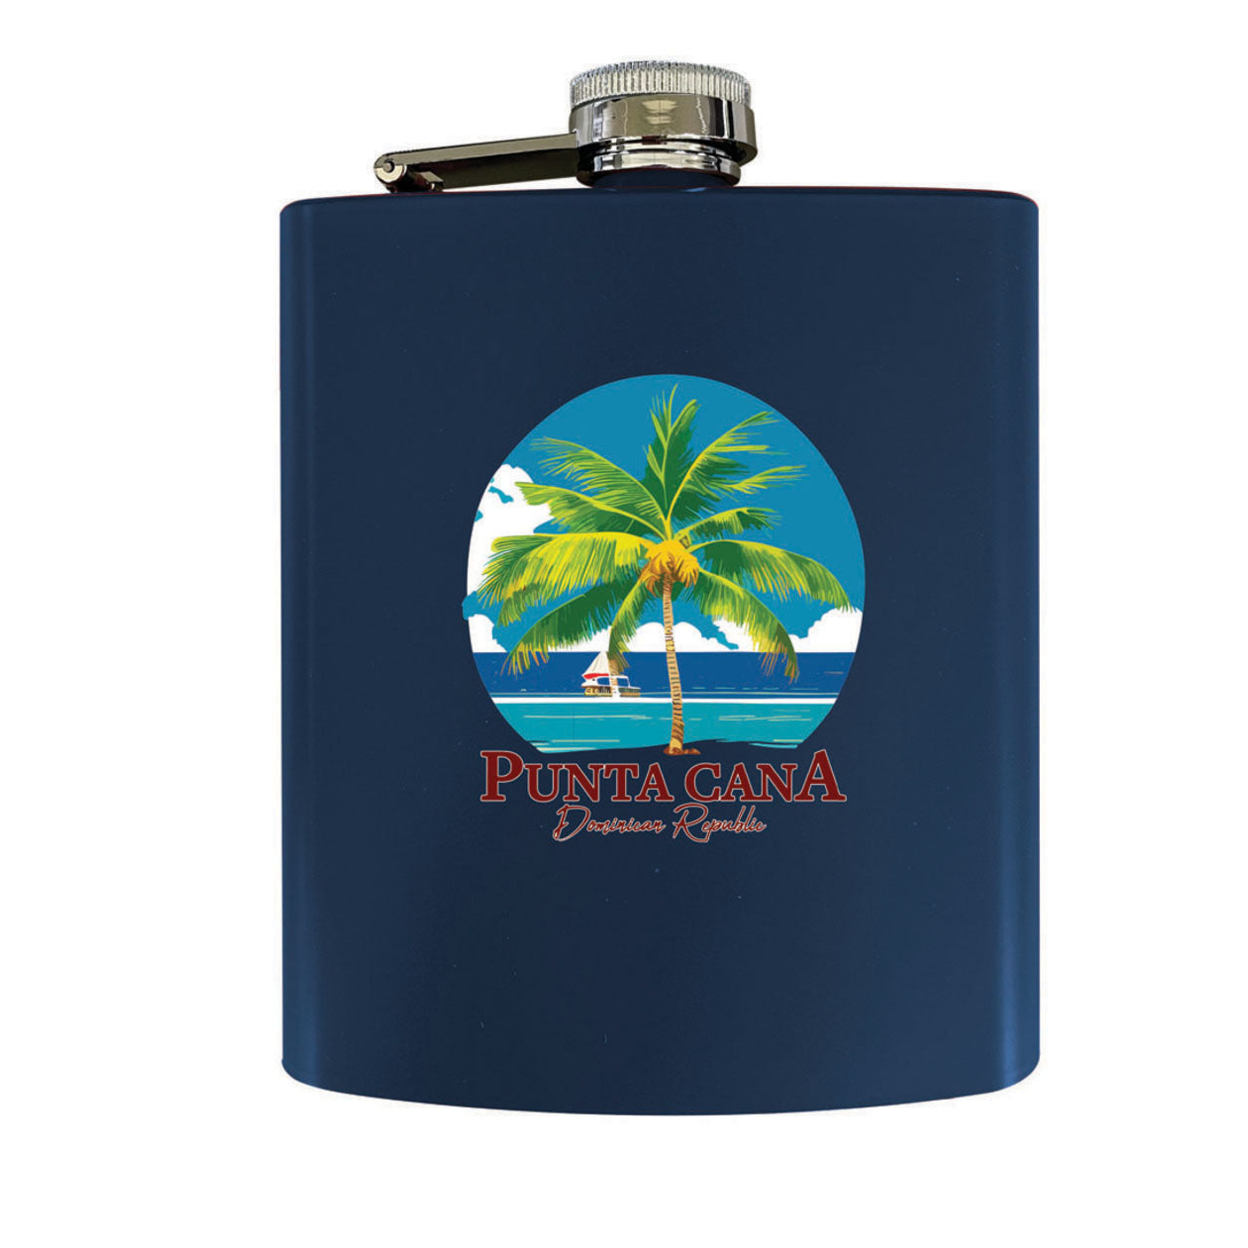 Punta Cana Dominican Republic Souvenir Matte Finish Stainless Steel 7 Oz Flask - Red, PALM